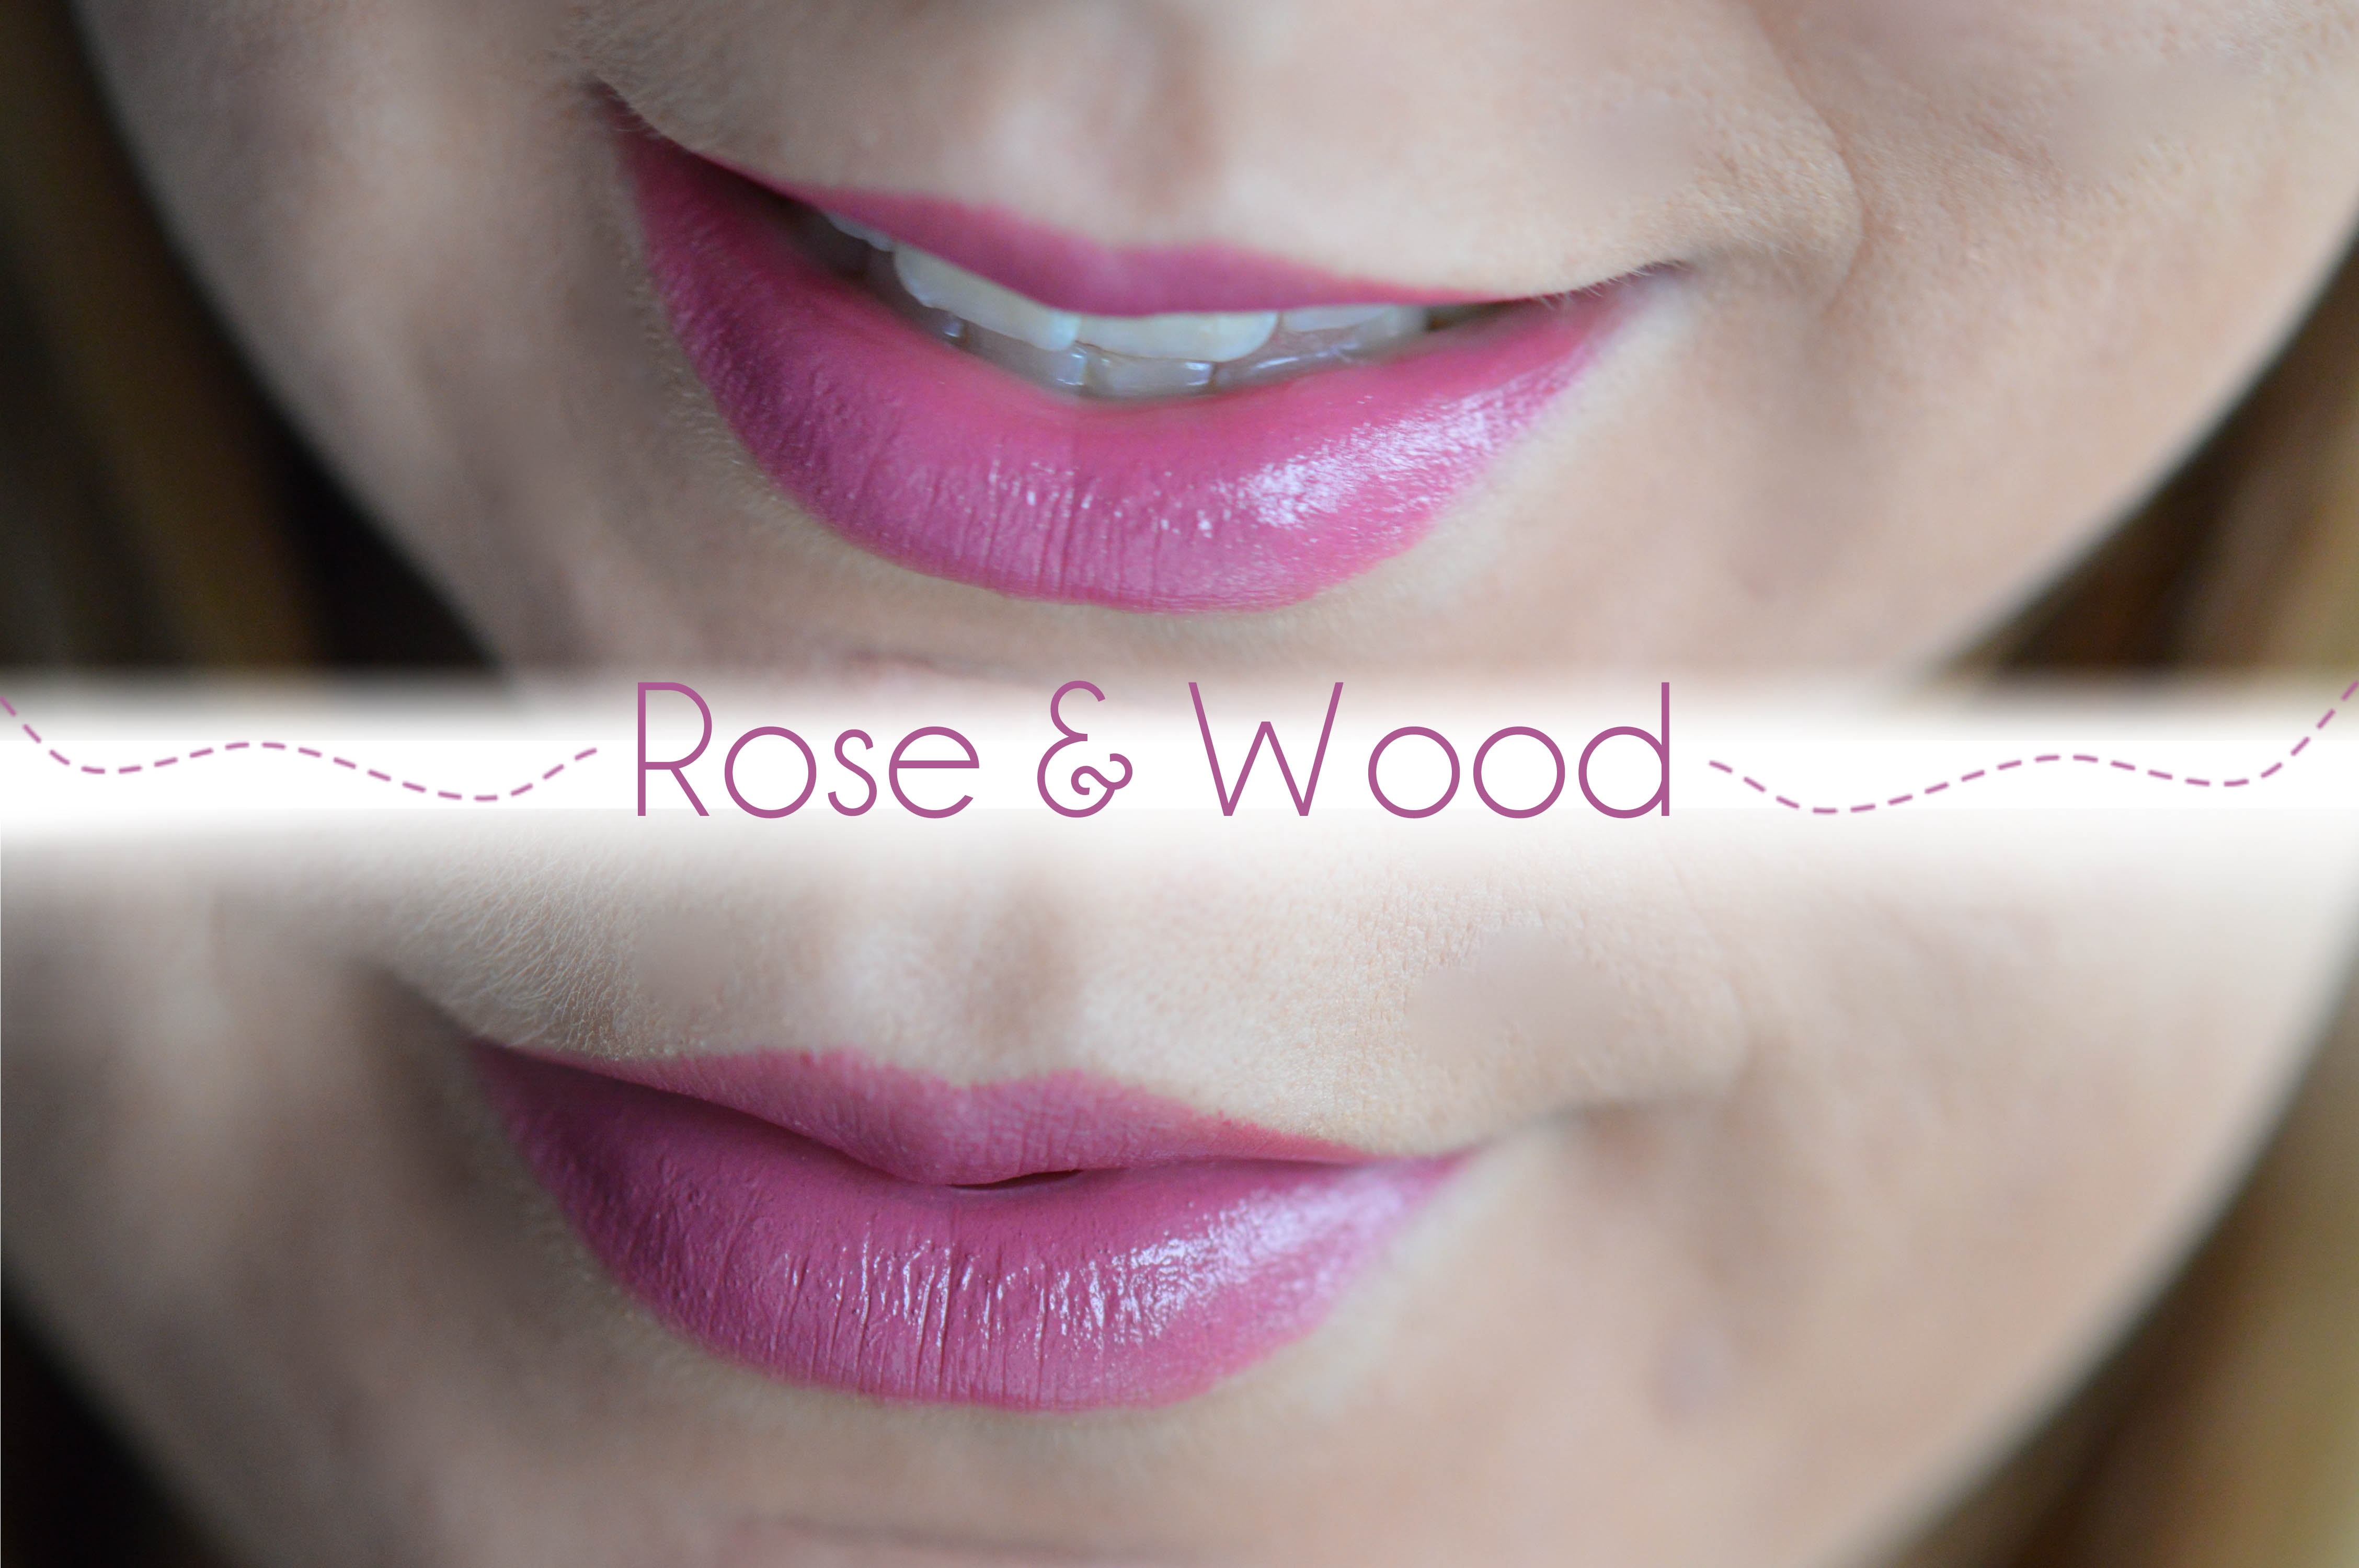 ALITTLEB_BLOG_BEAUTE_RESERVE_NATURELLE_LIP_AND_KISS_ROSE_AND_WOOD_VIEUX_ROSE_SWATCH